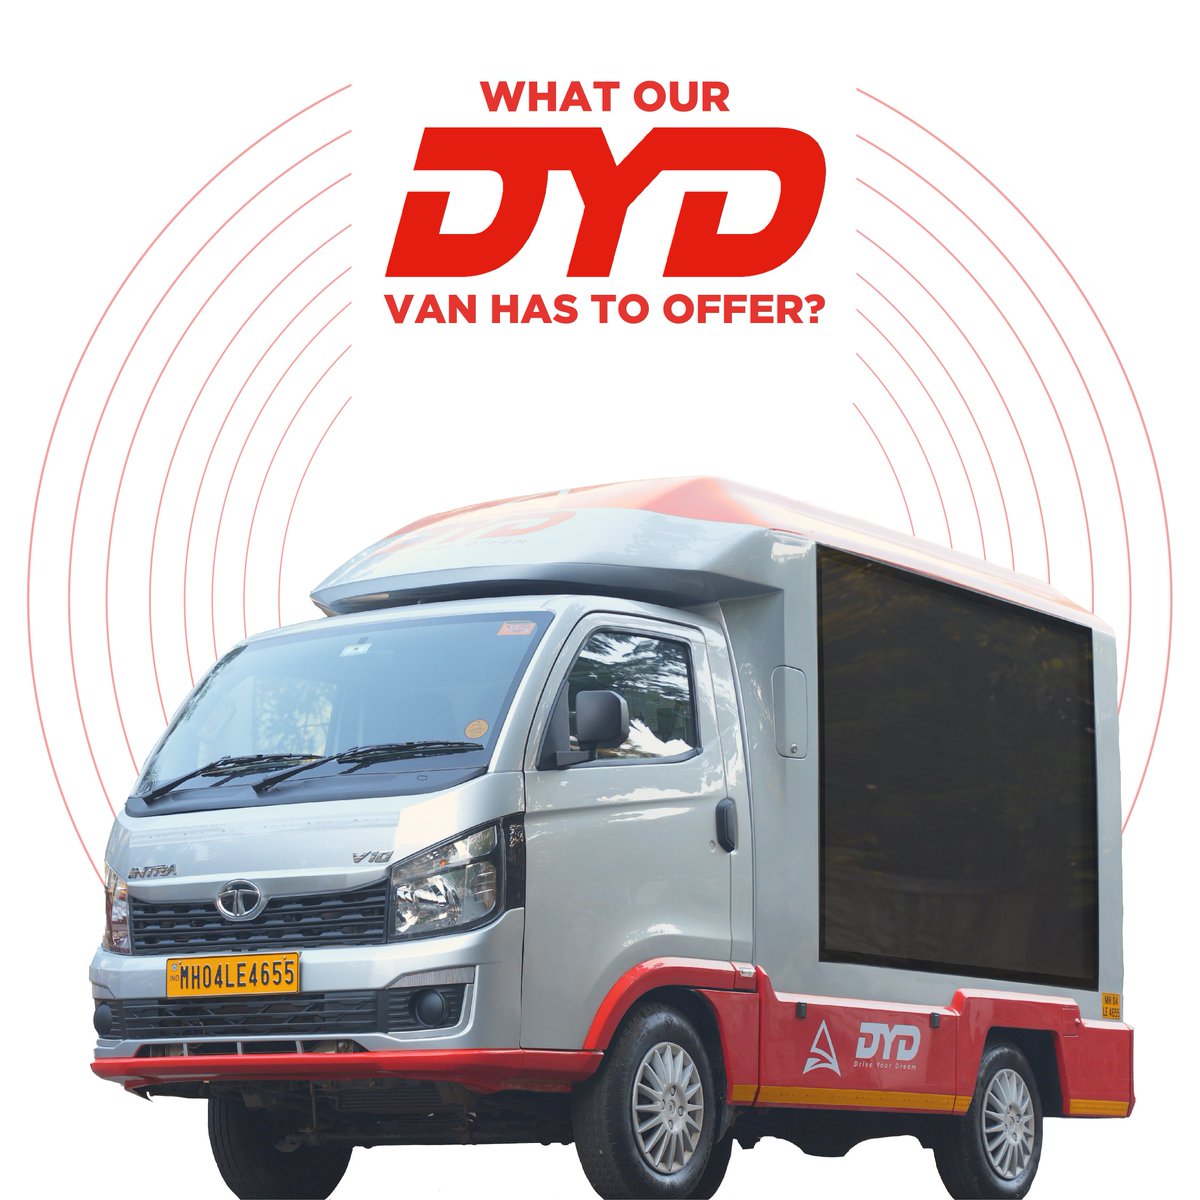 Car servicing ka ab no tension because DYD brings home Car Service Station!🚐
DYD Van offers 
#hasslefreeservice #Doorstepservice 
#Qualitywork #brandedparts
.
.
.
#DYD #DoitWithDYD #DYDvan #carservice #cars #wellequipped #automotive #carrepair #mechanic #carcare #auto